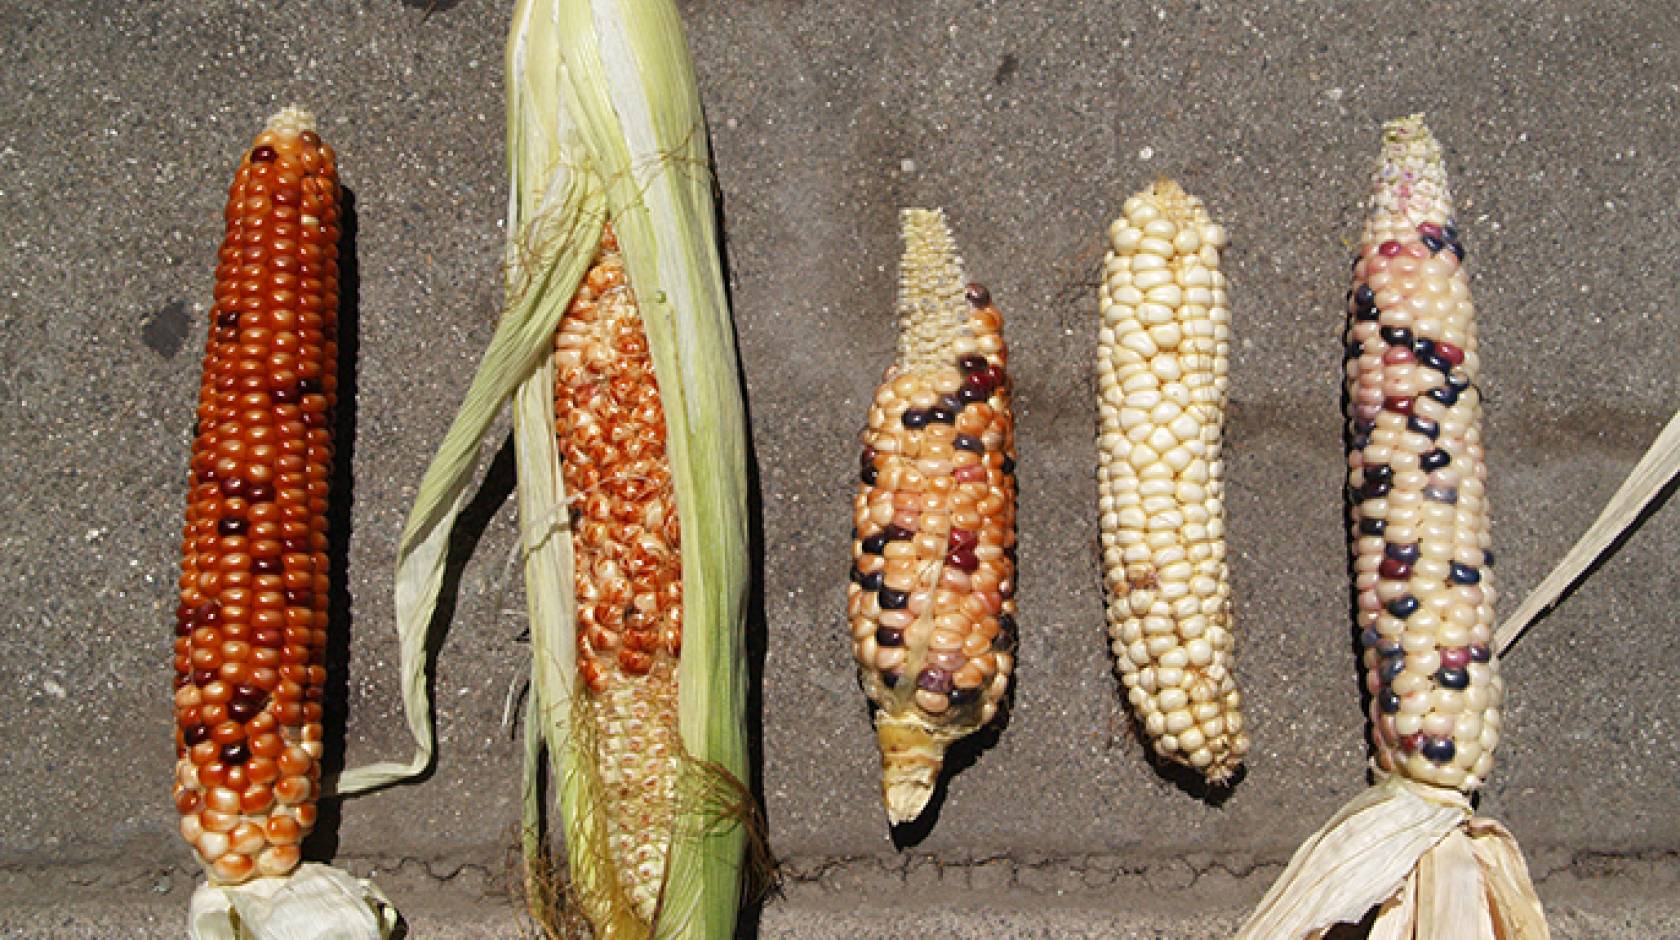 A sampling of the diversity of corn found in Southern California urban gardens.